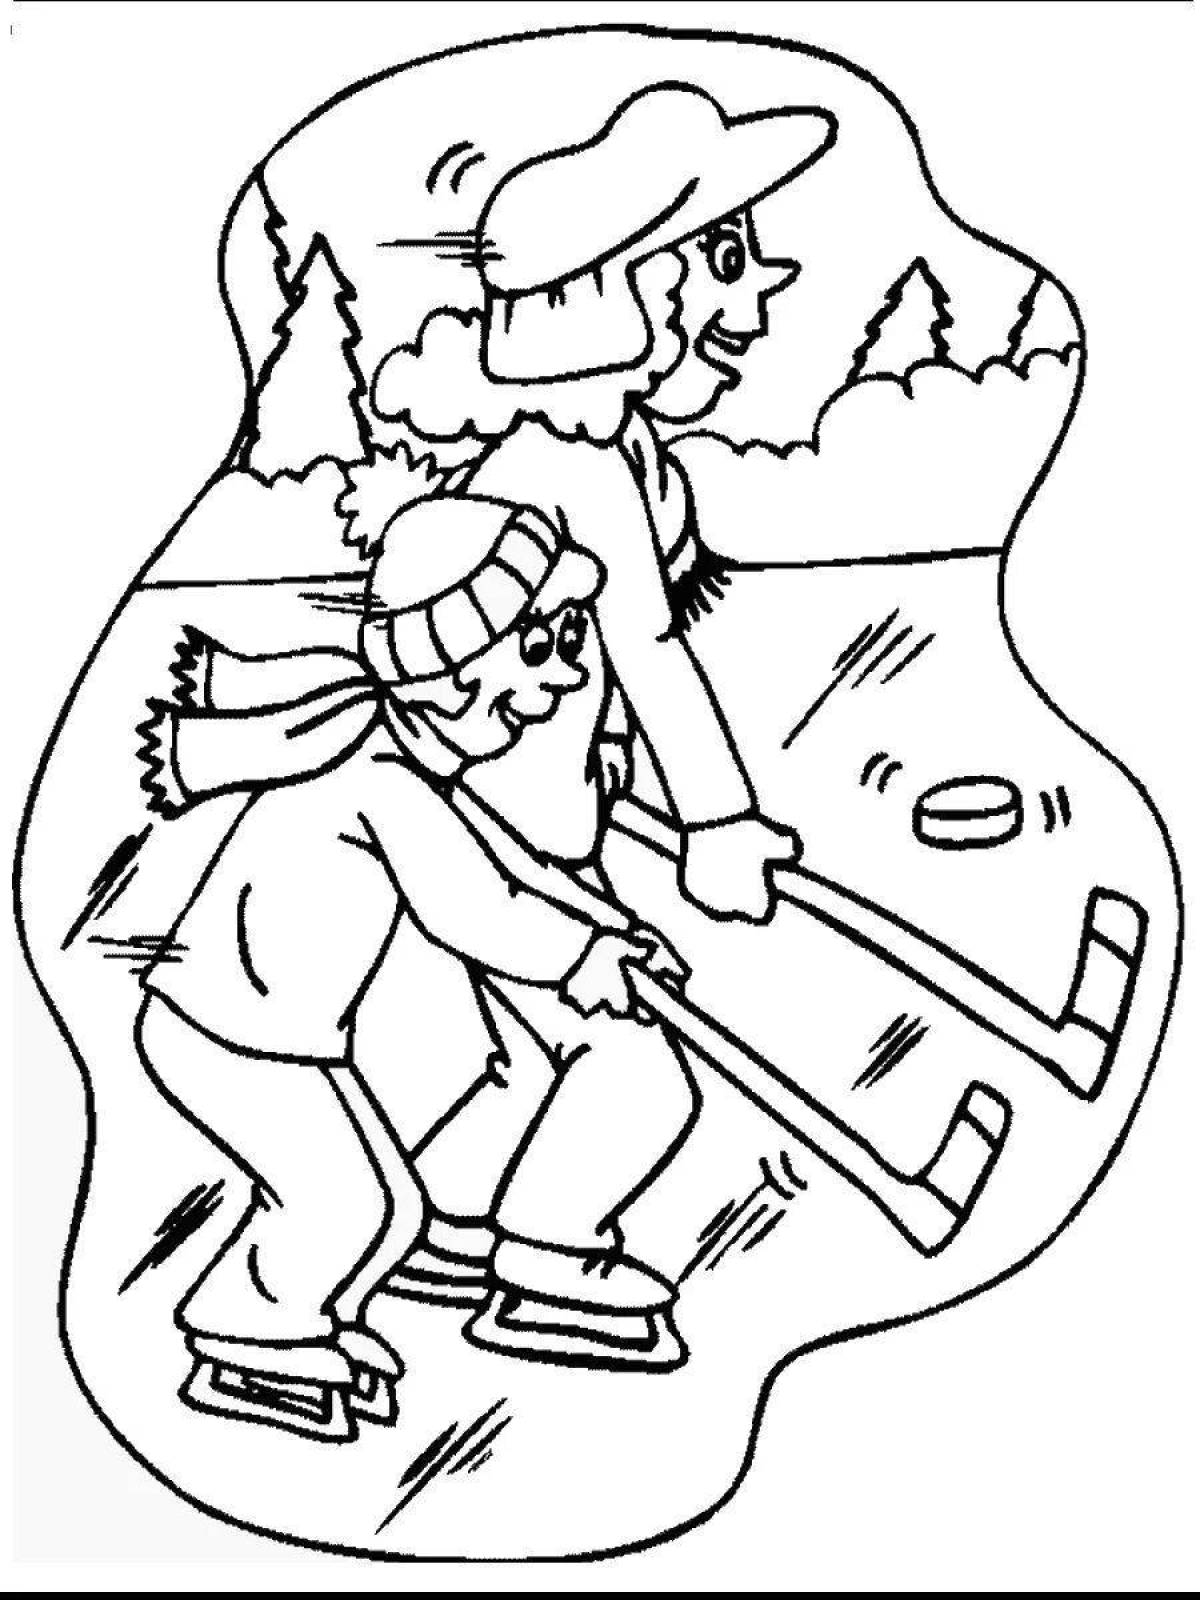 Color-frenzy winter safety coloring page for preschoolers